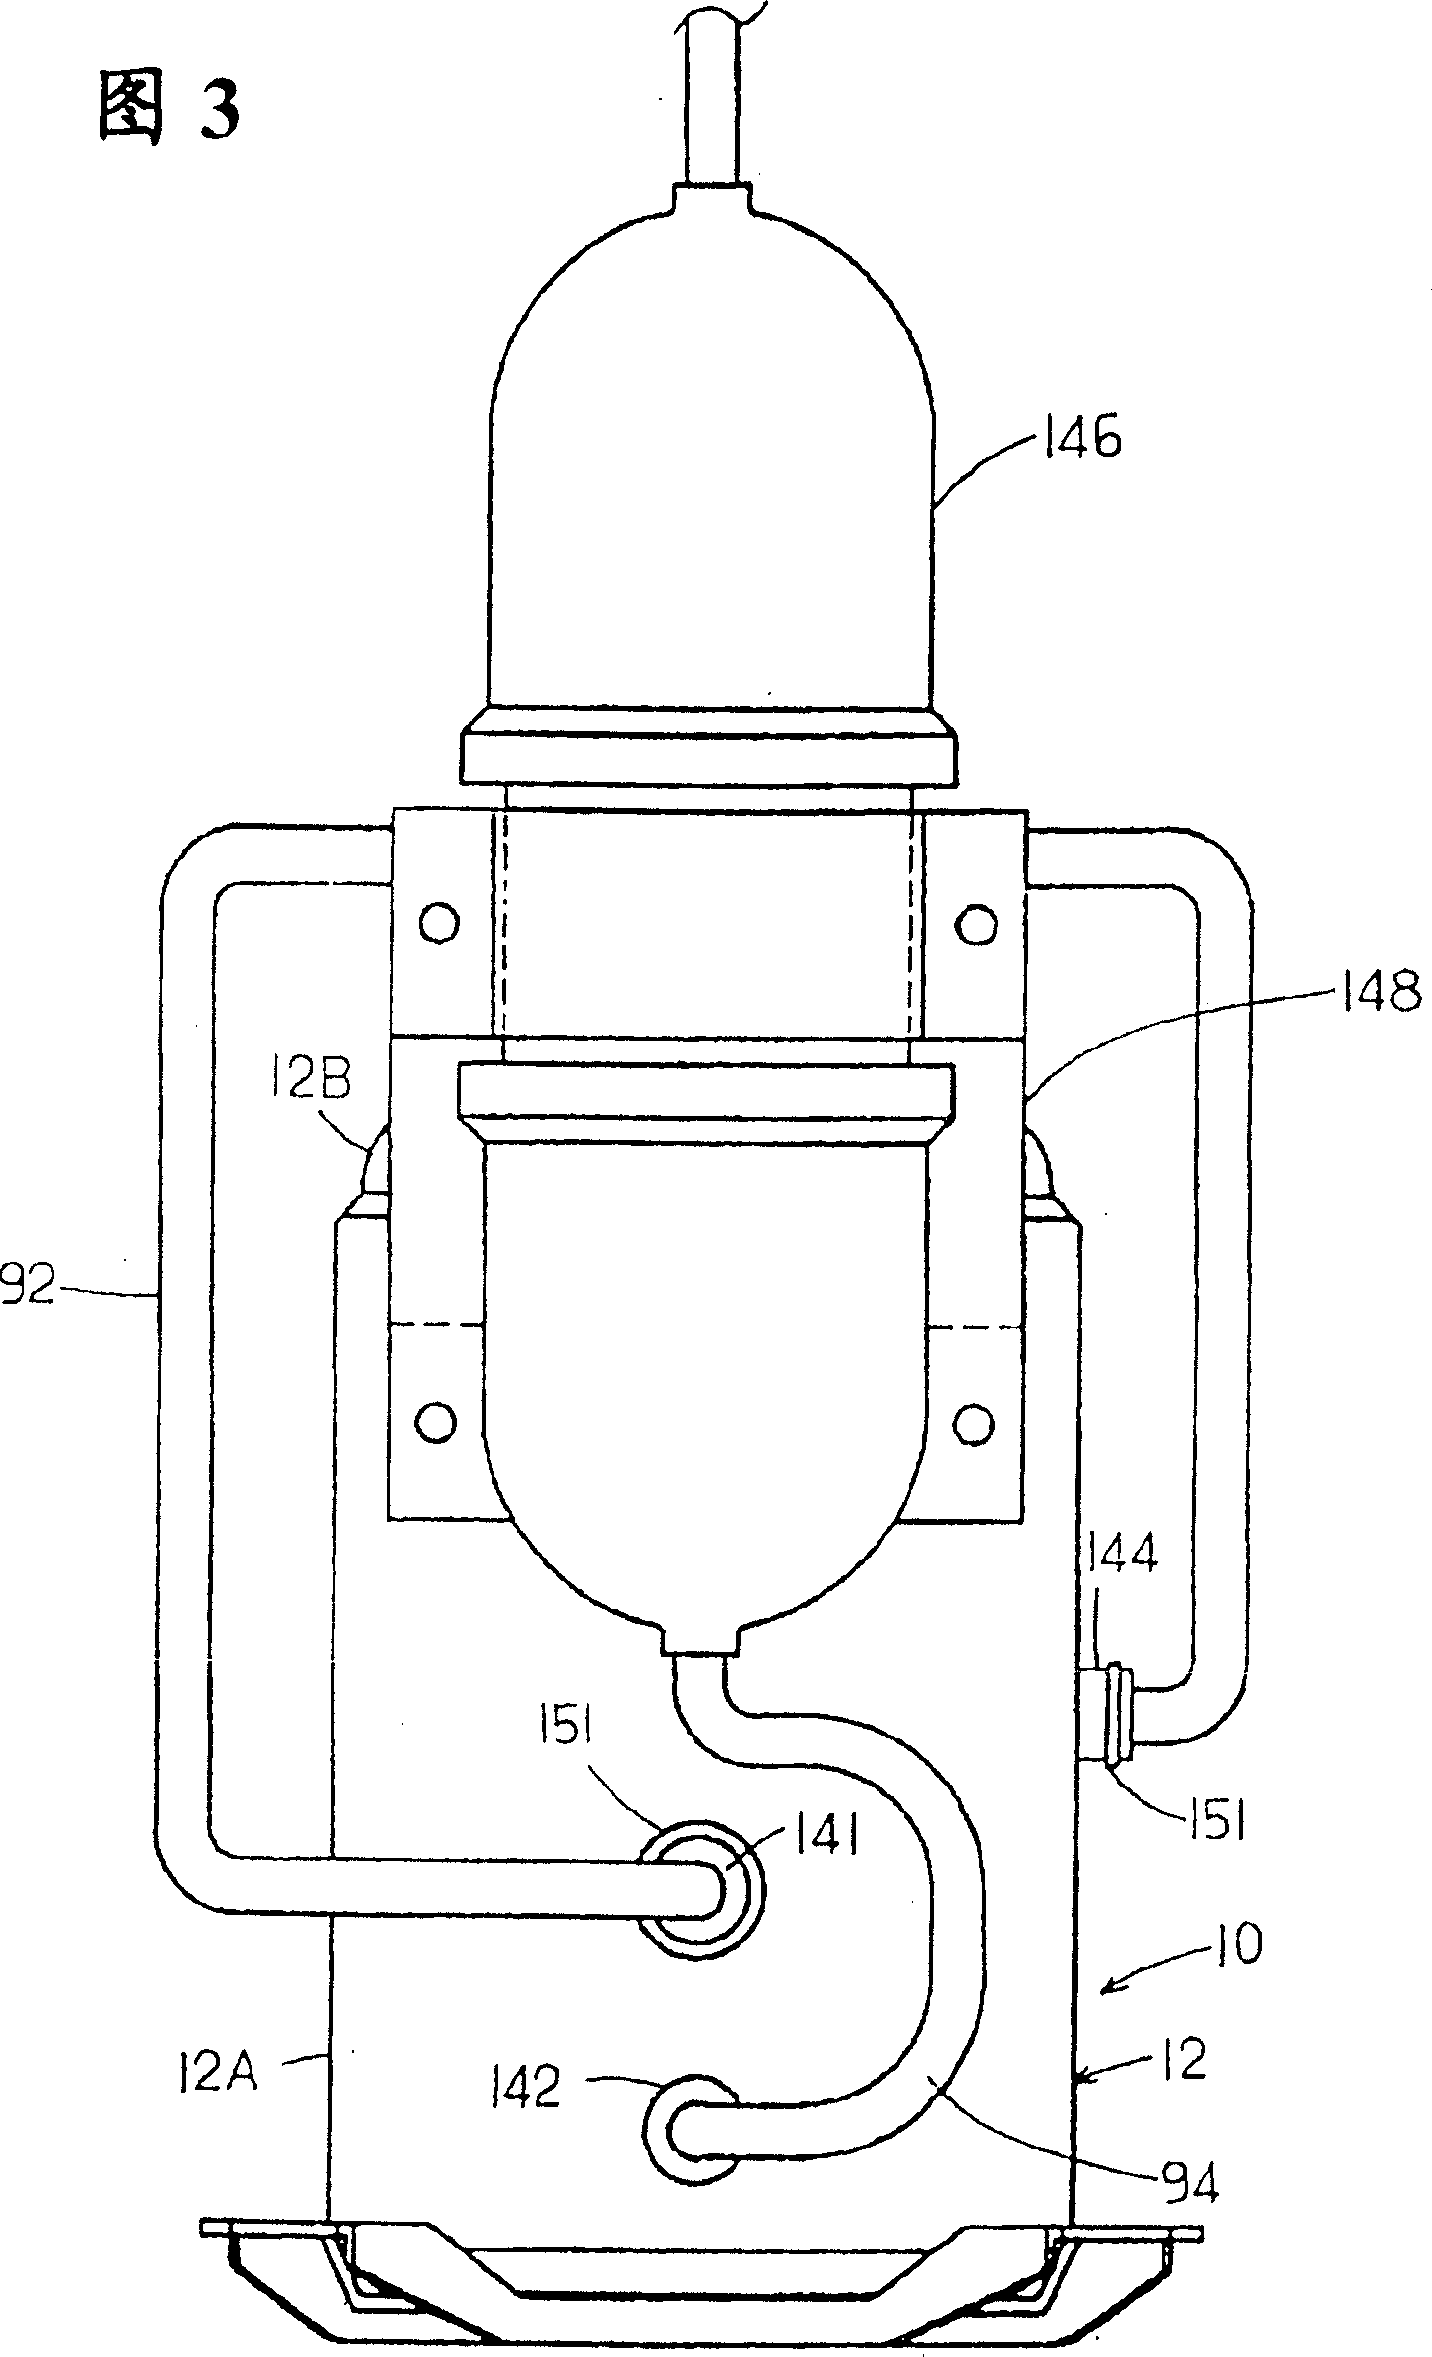 Defroster of refrigerant circuit and rotary compressor